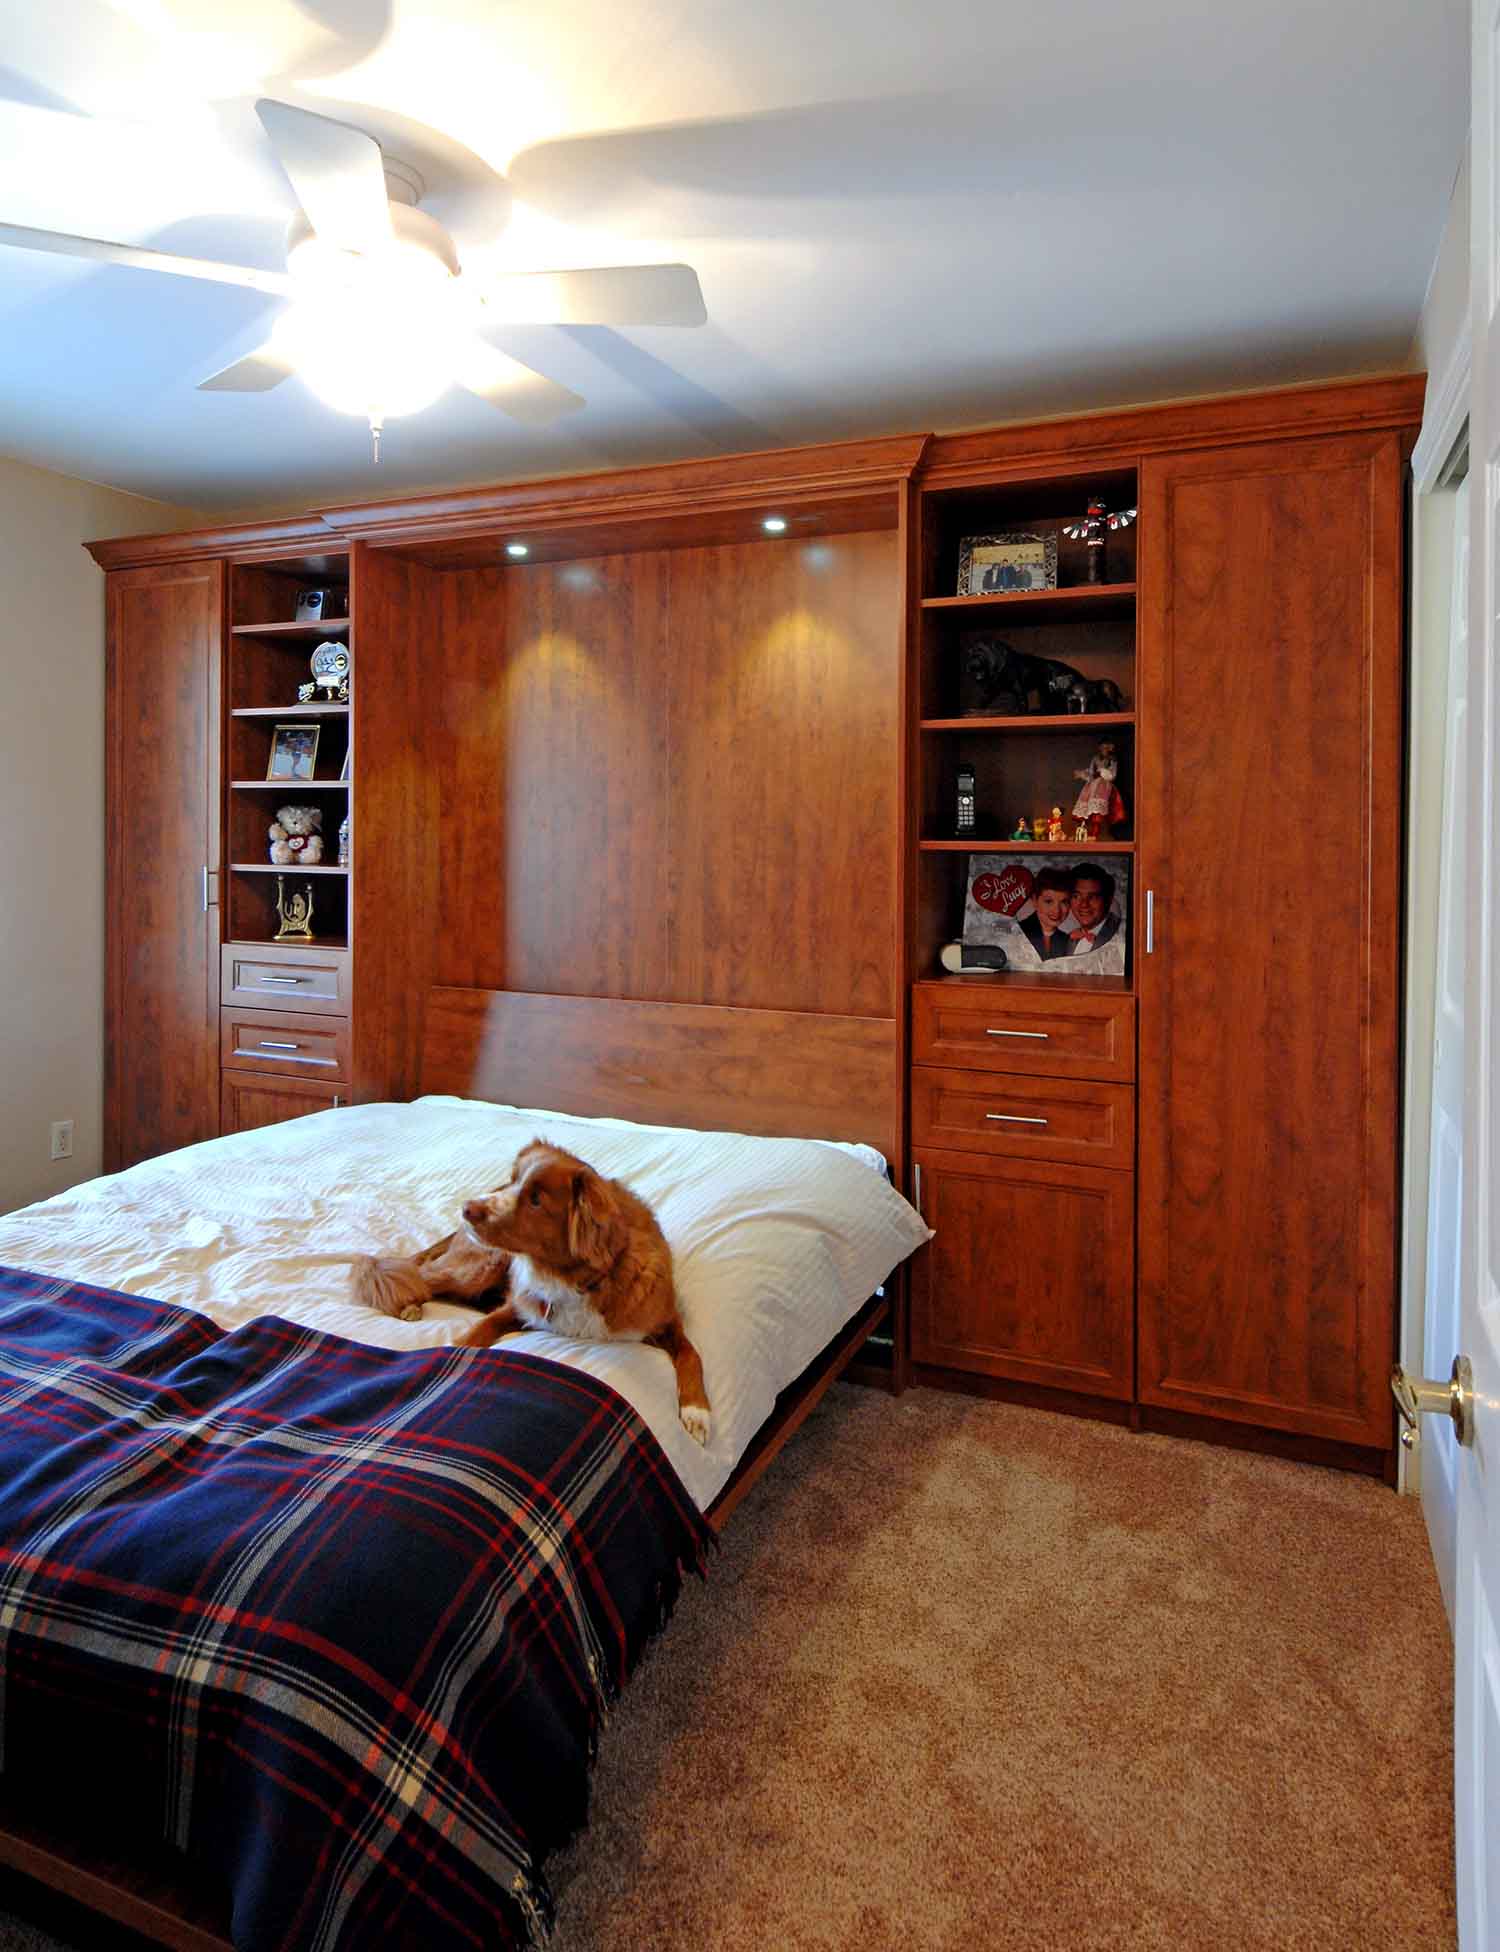 Murphy bed made with dog resting on top